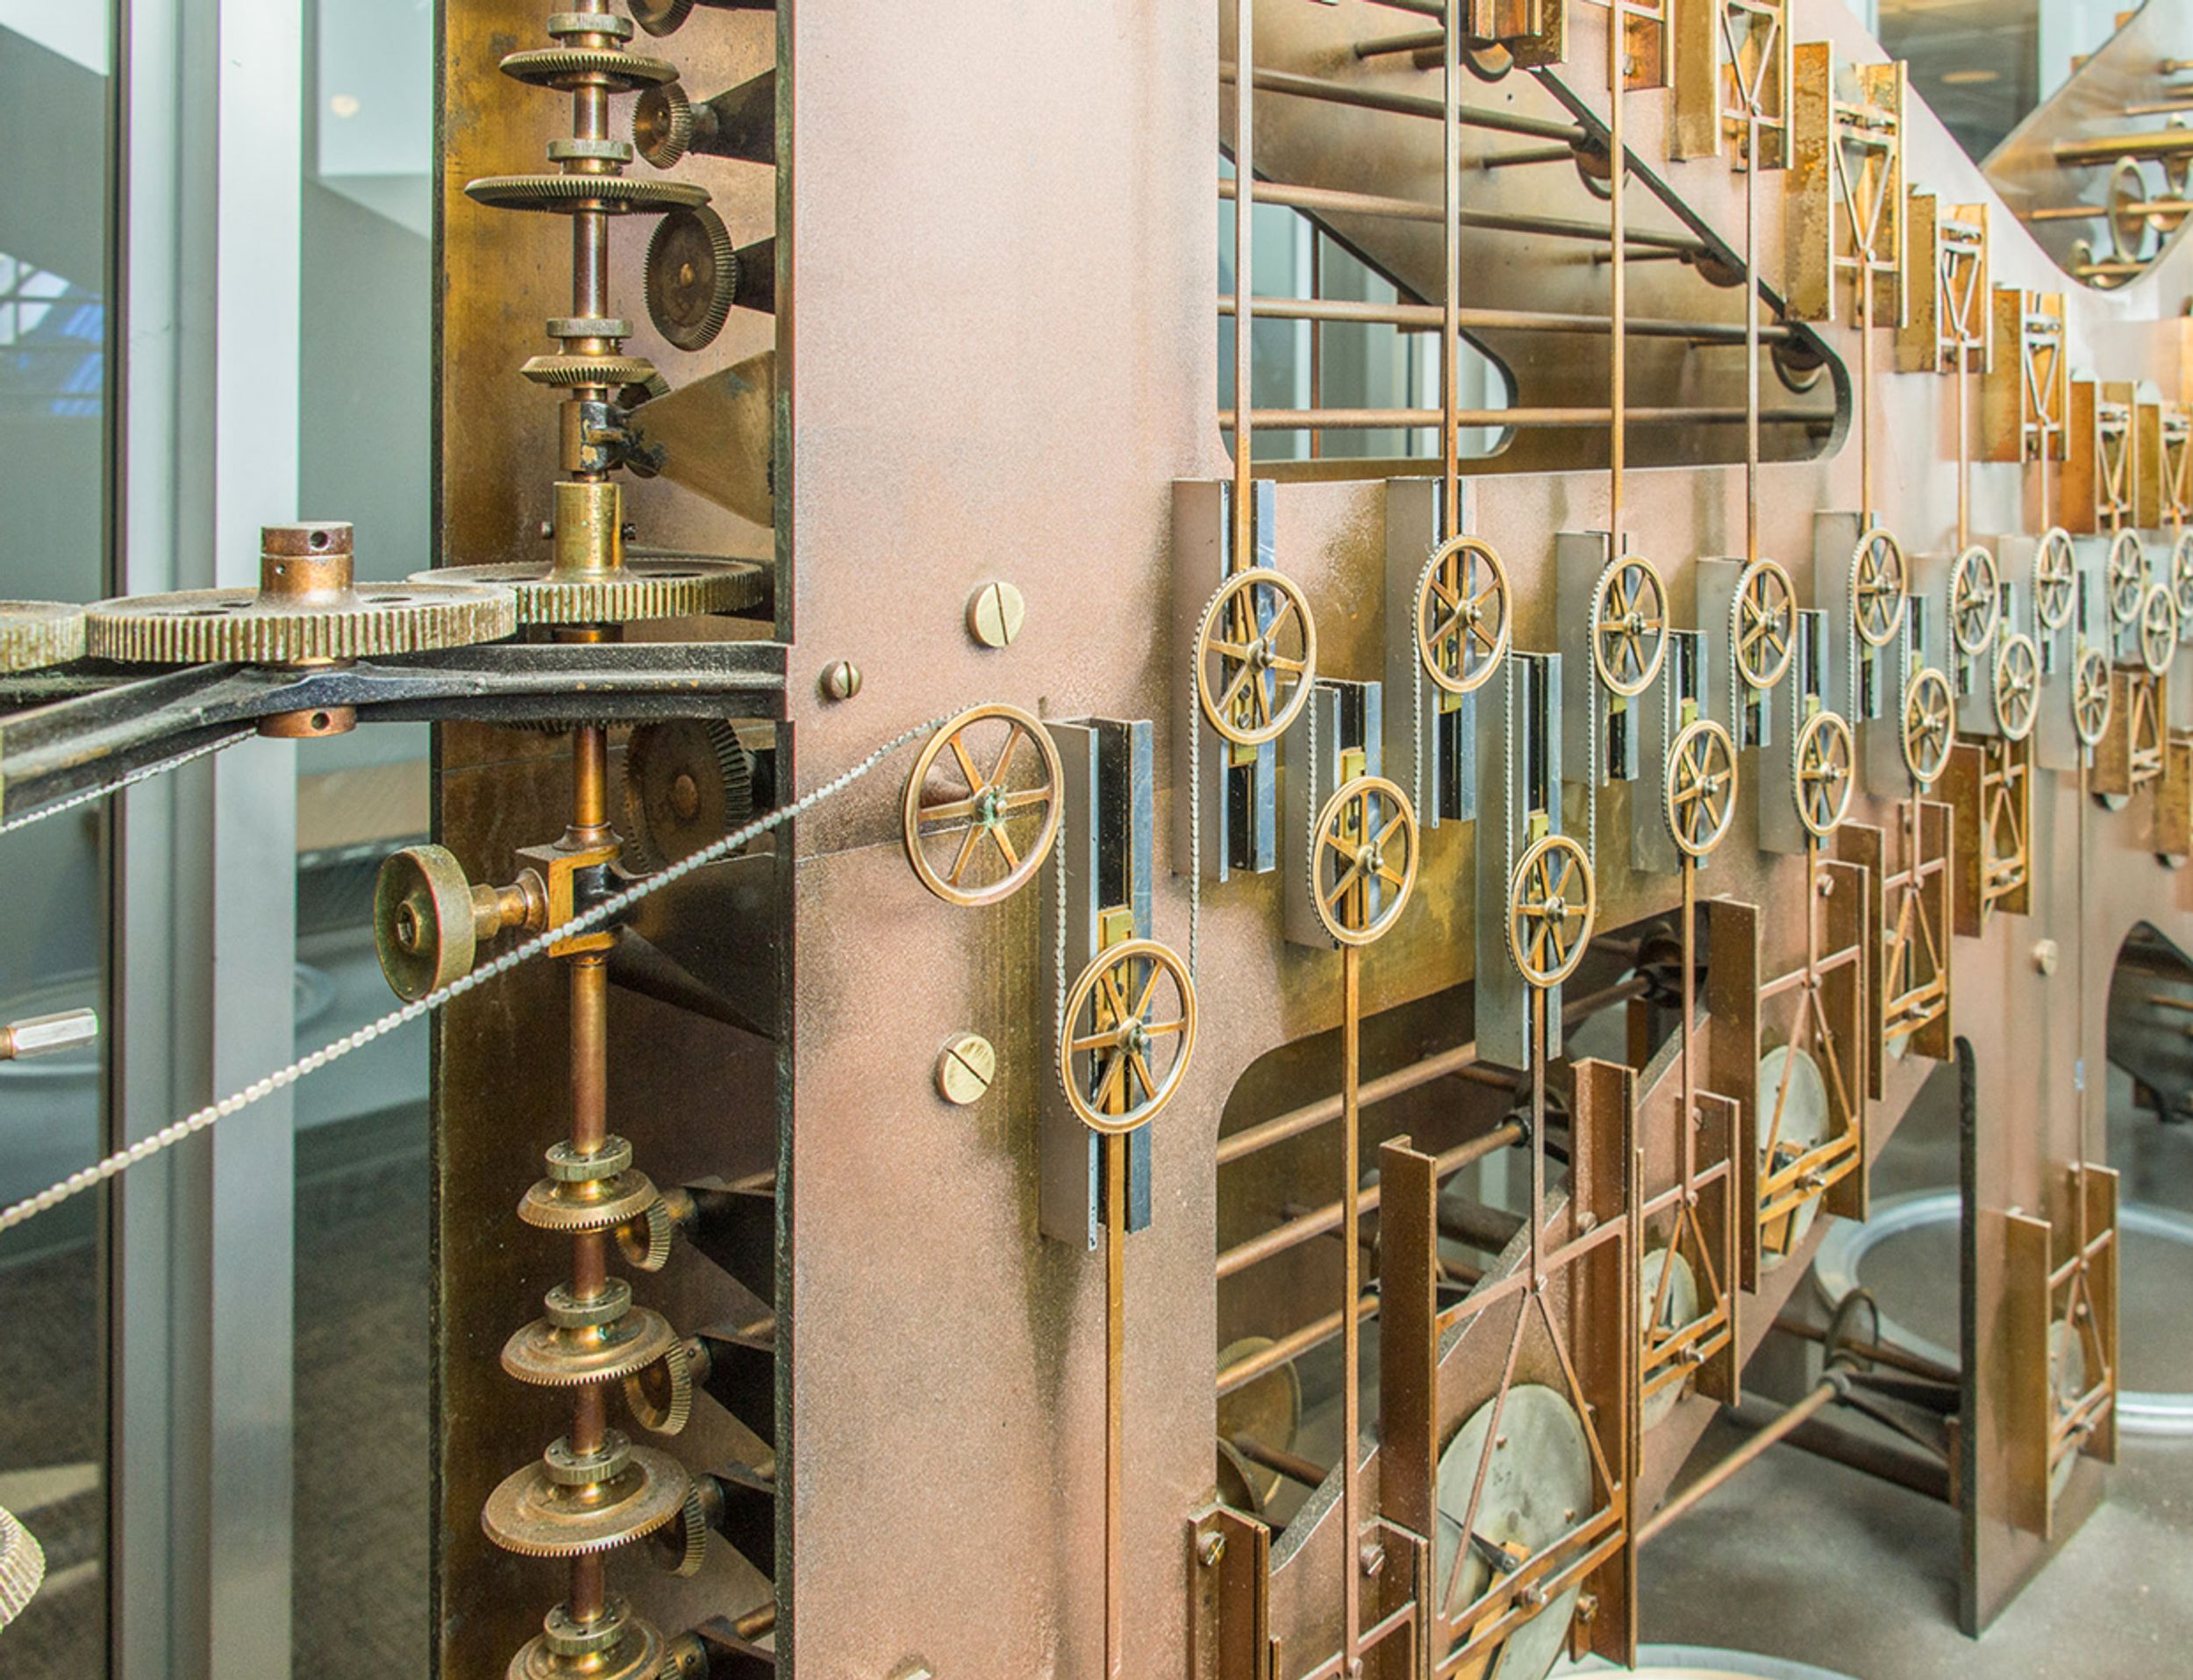 Photo of a mechanical analog computer used for predicting tides.